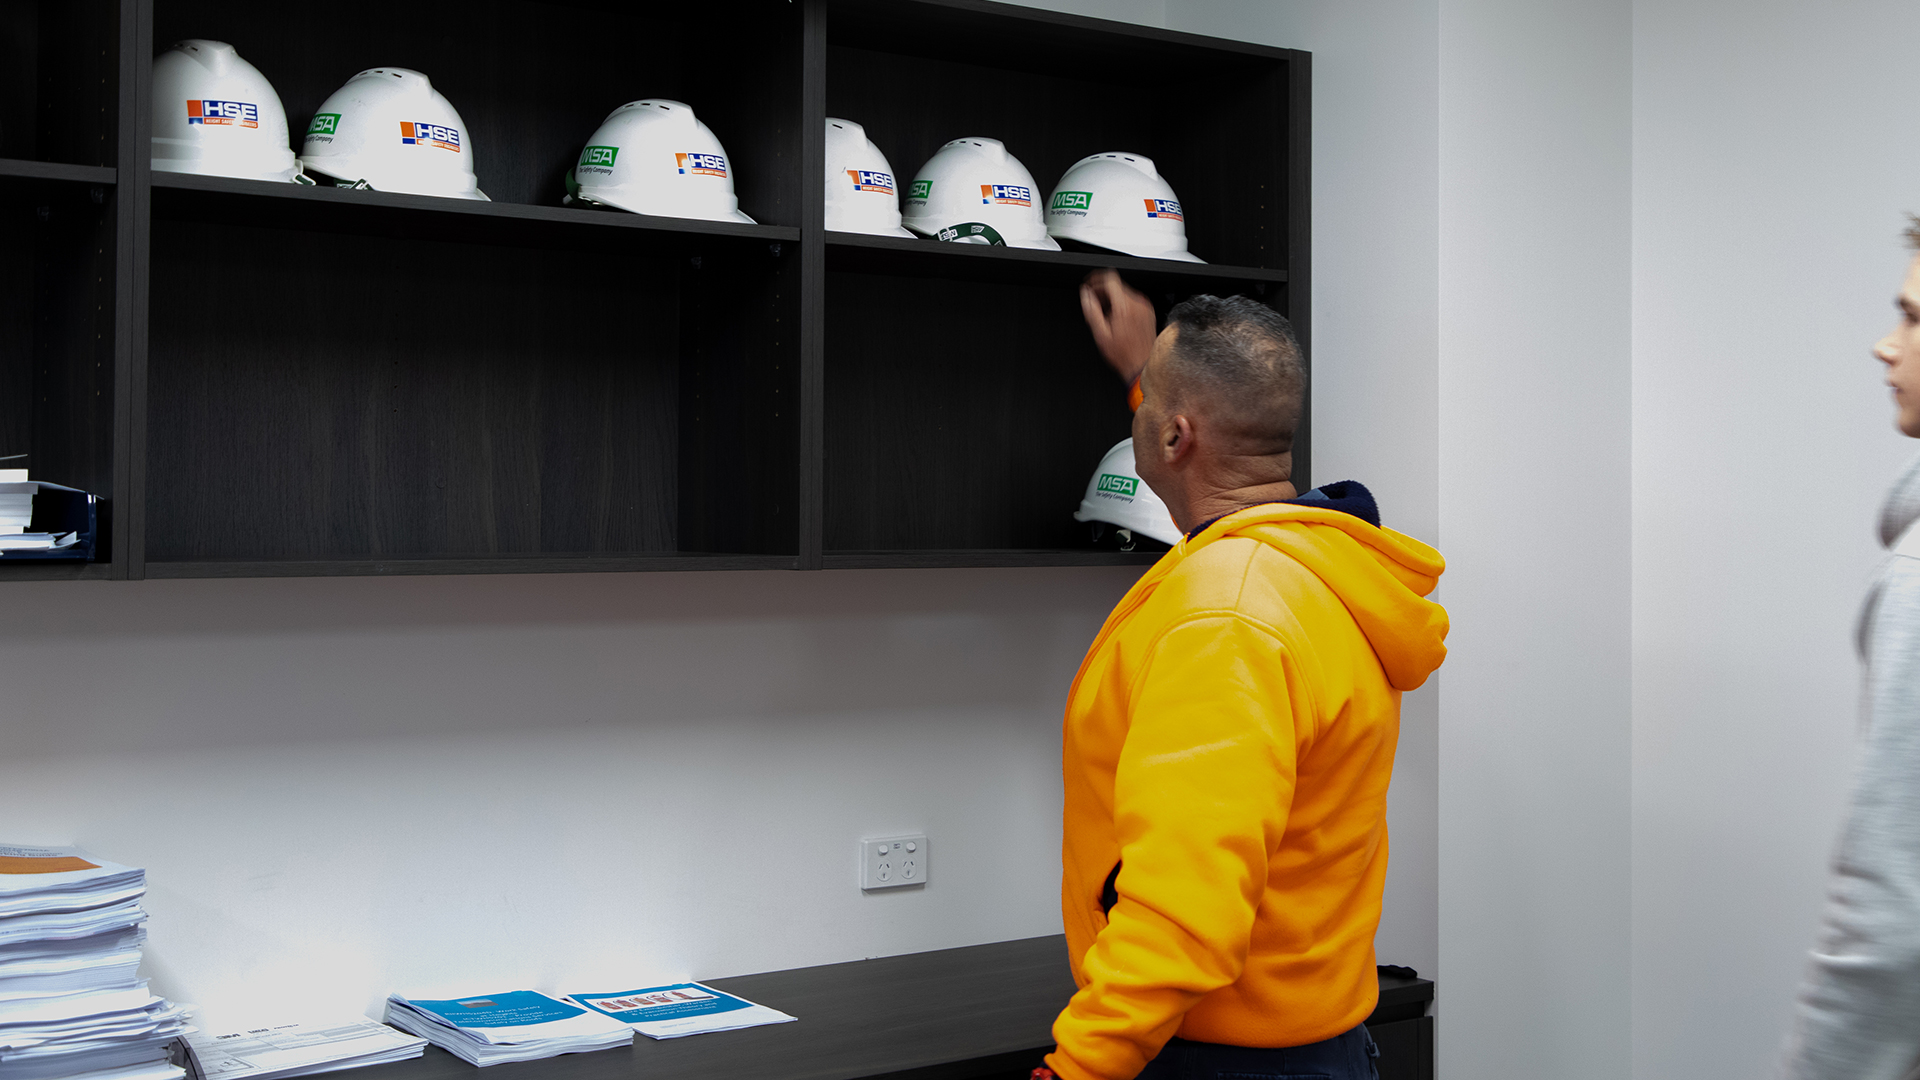 Course participant taking a hard hat off the classroom shelf.